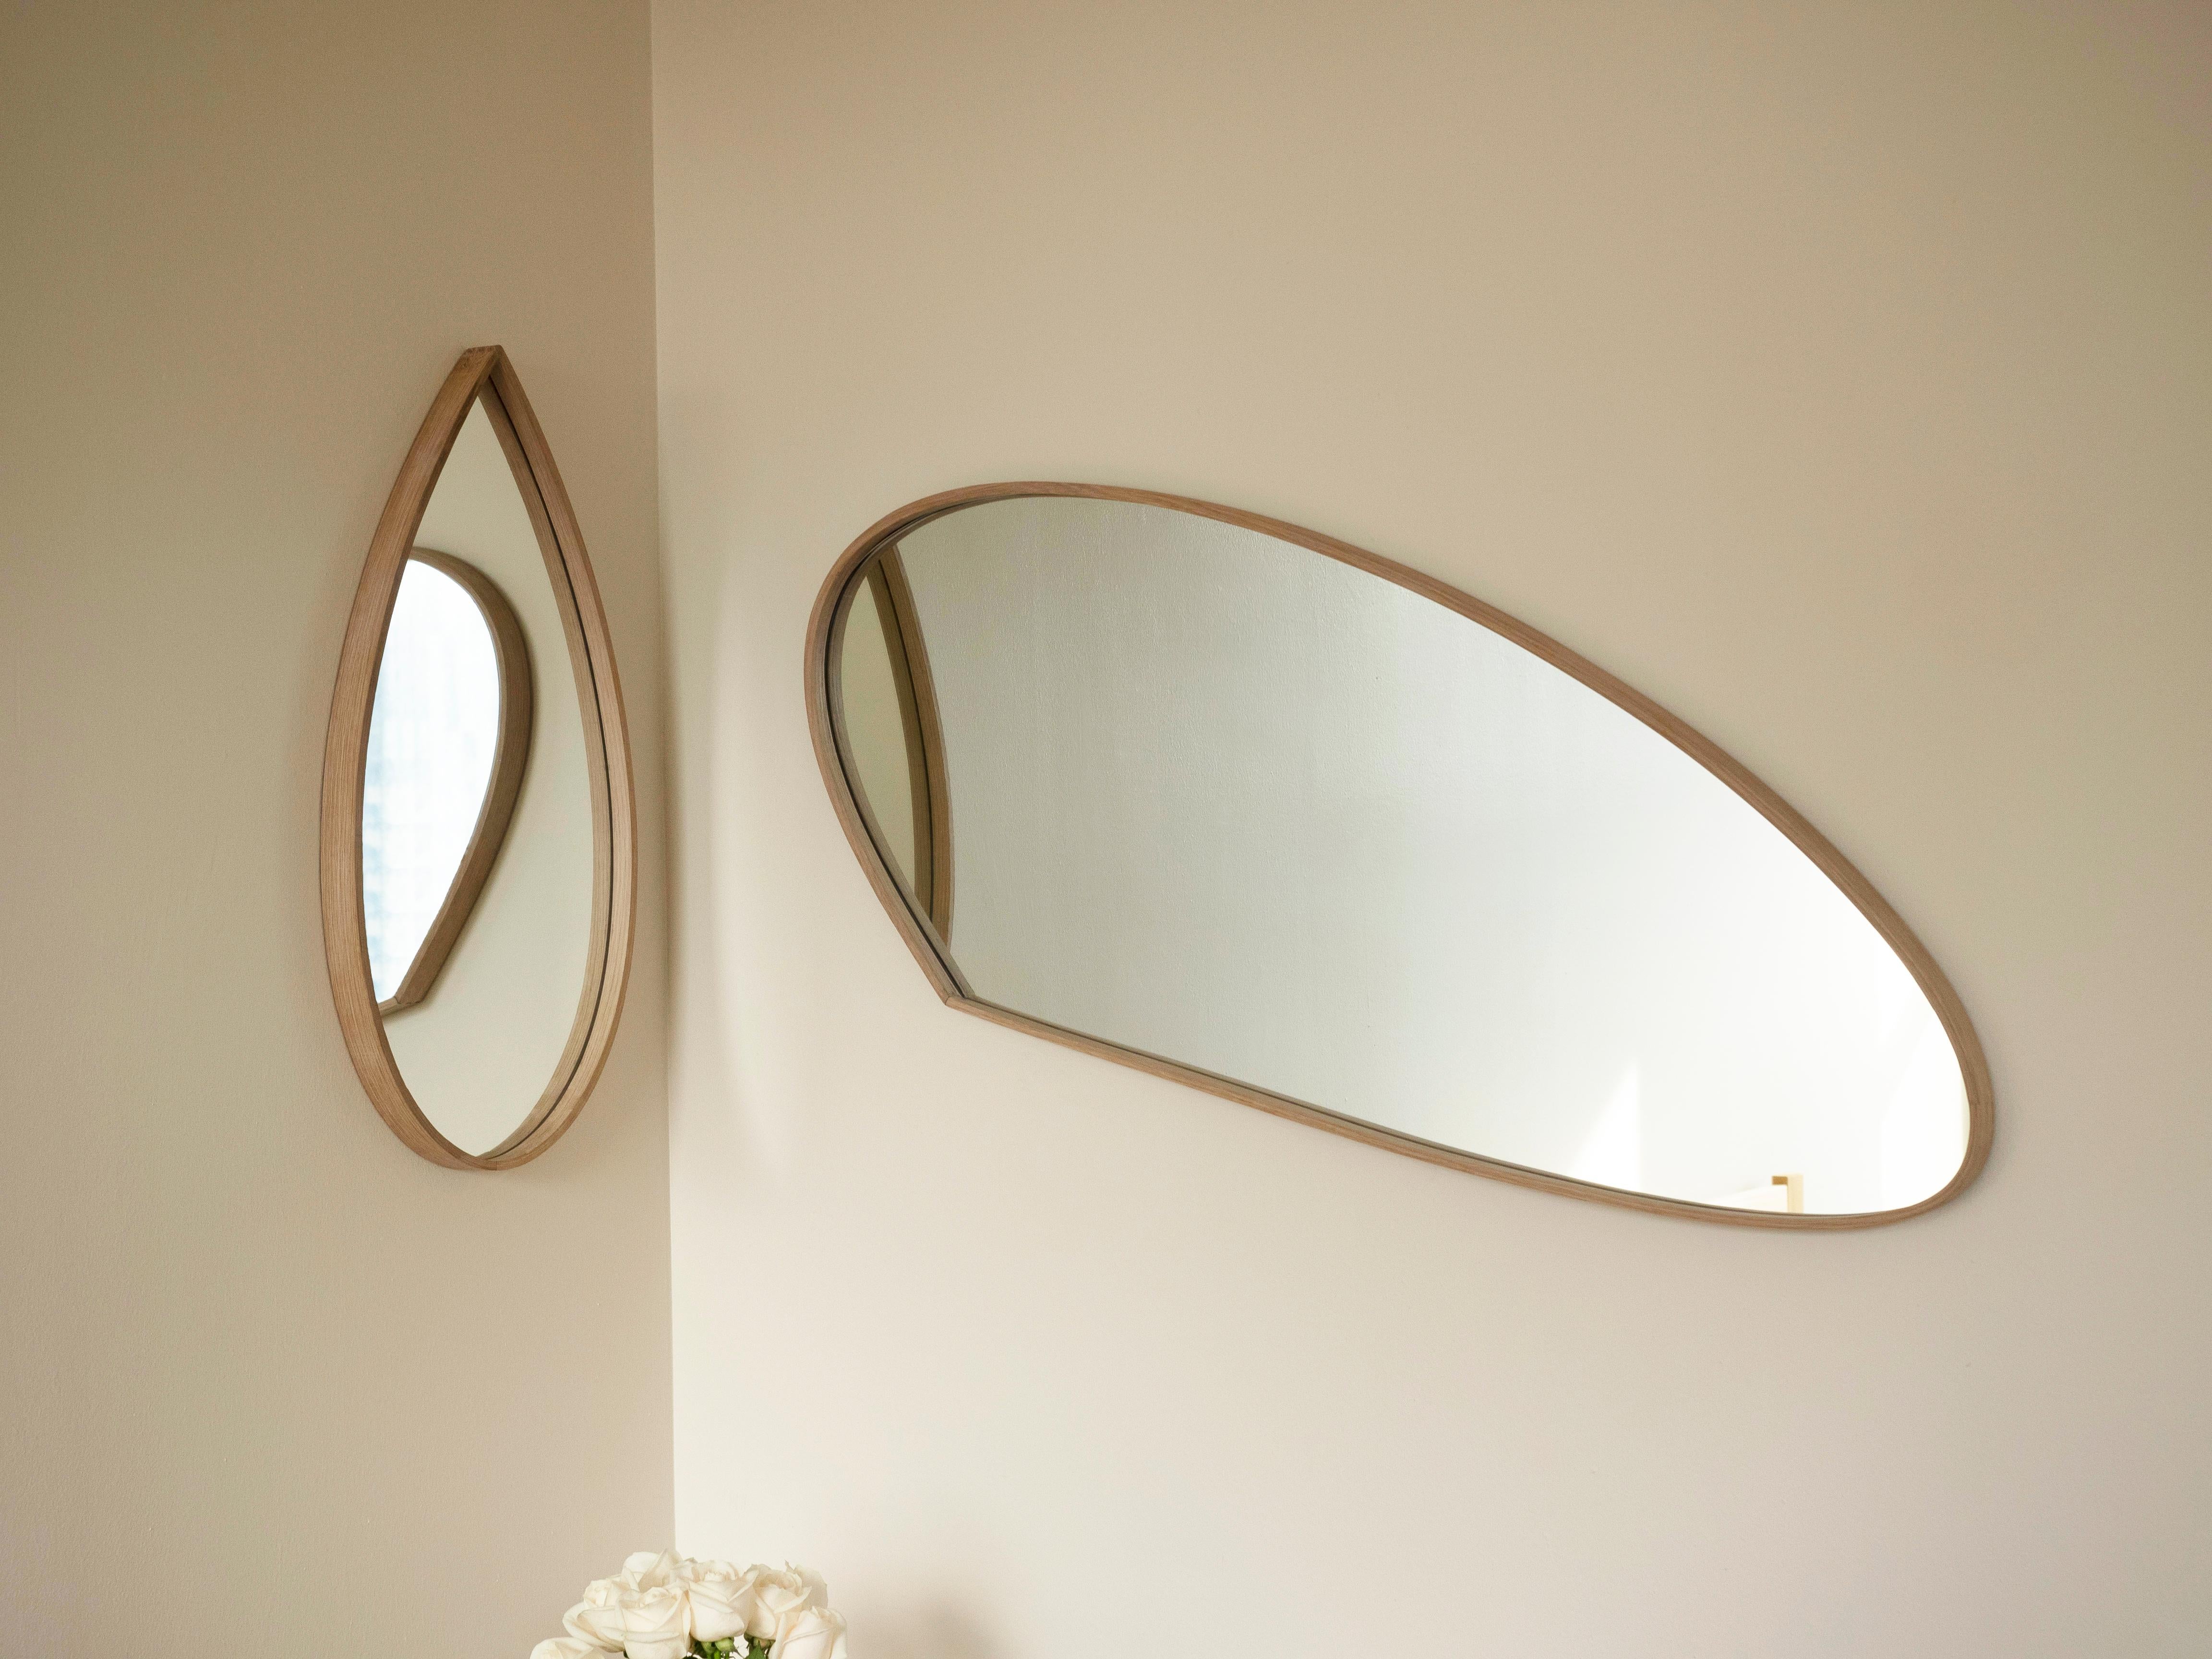 Hand-Carved Organic Mirror, Wooden Steam-Bent Wall Mirror by Soo Joo For Sale